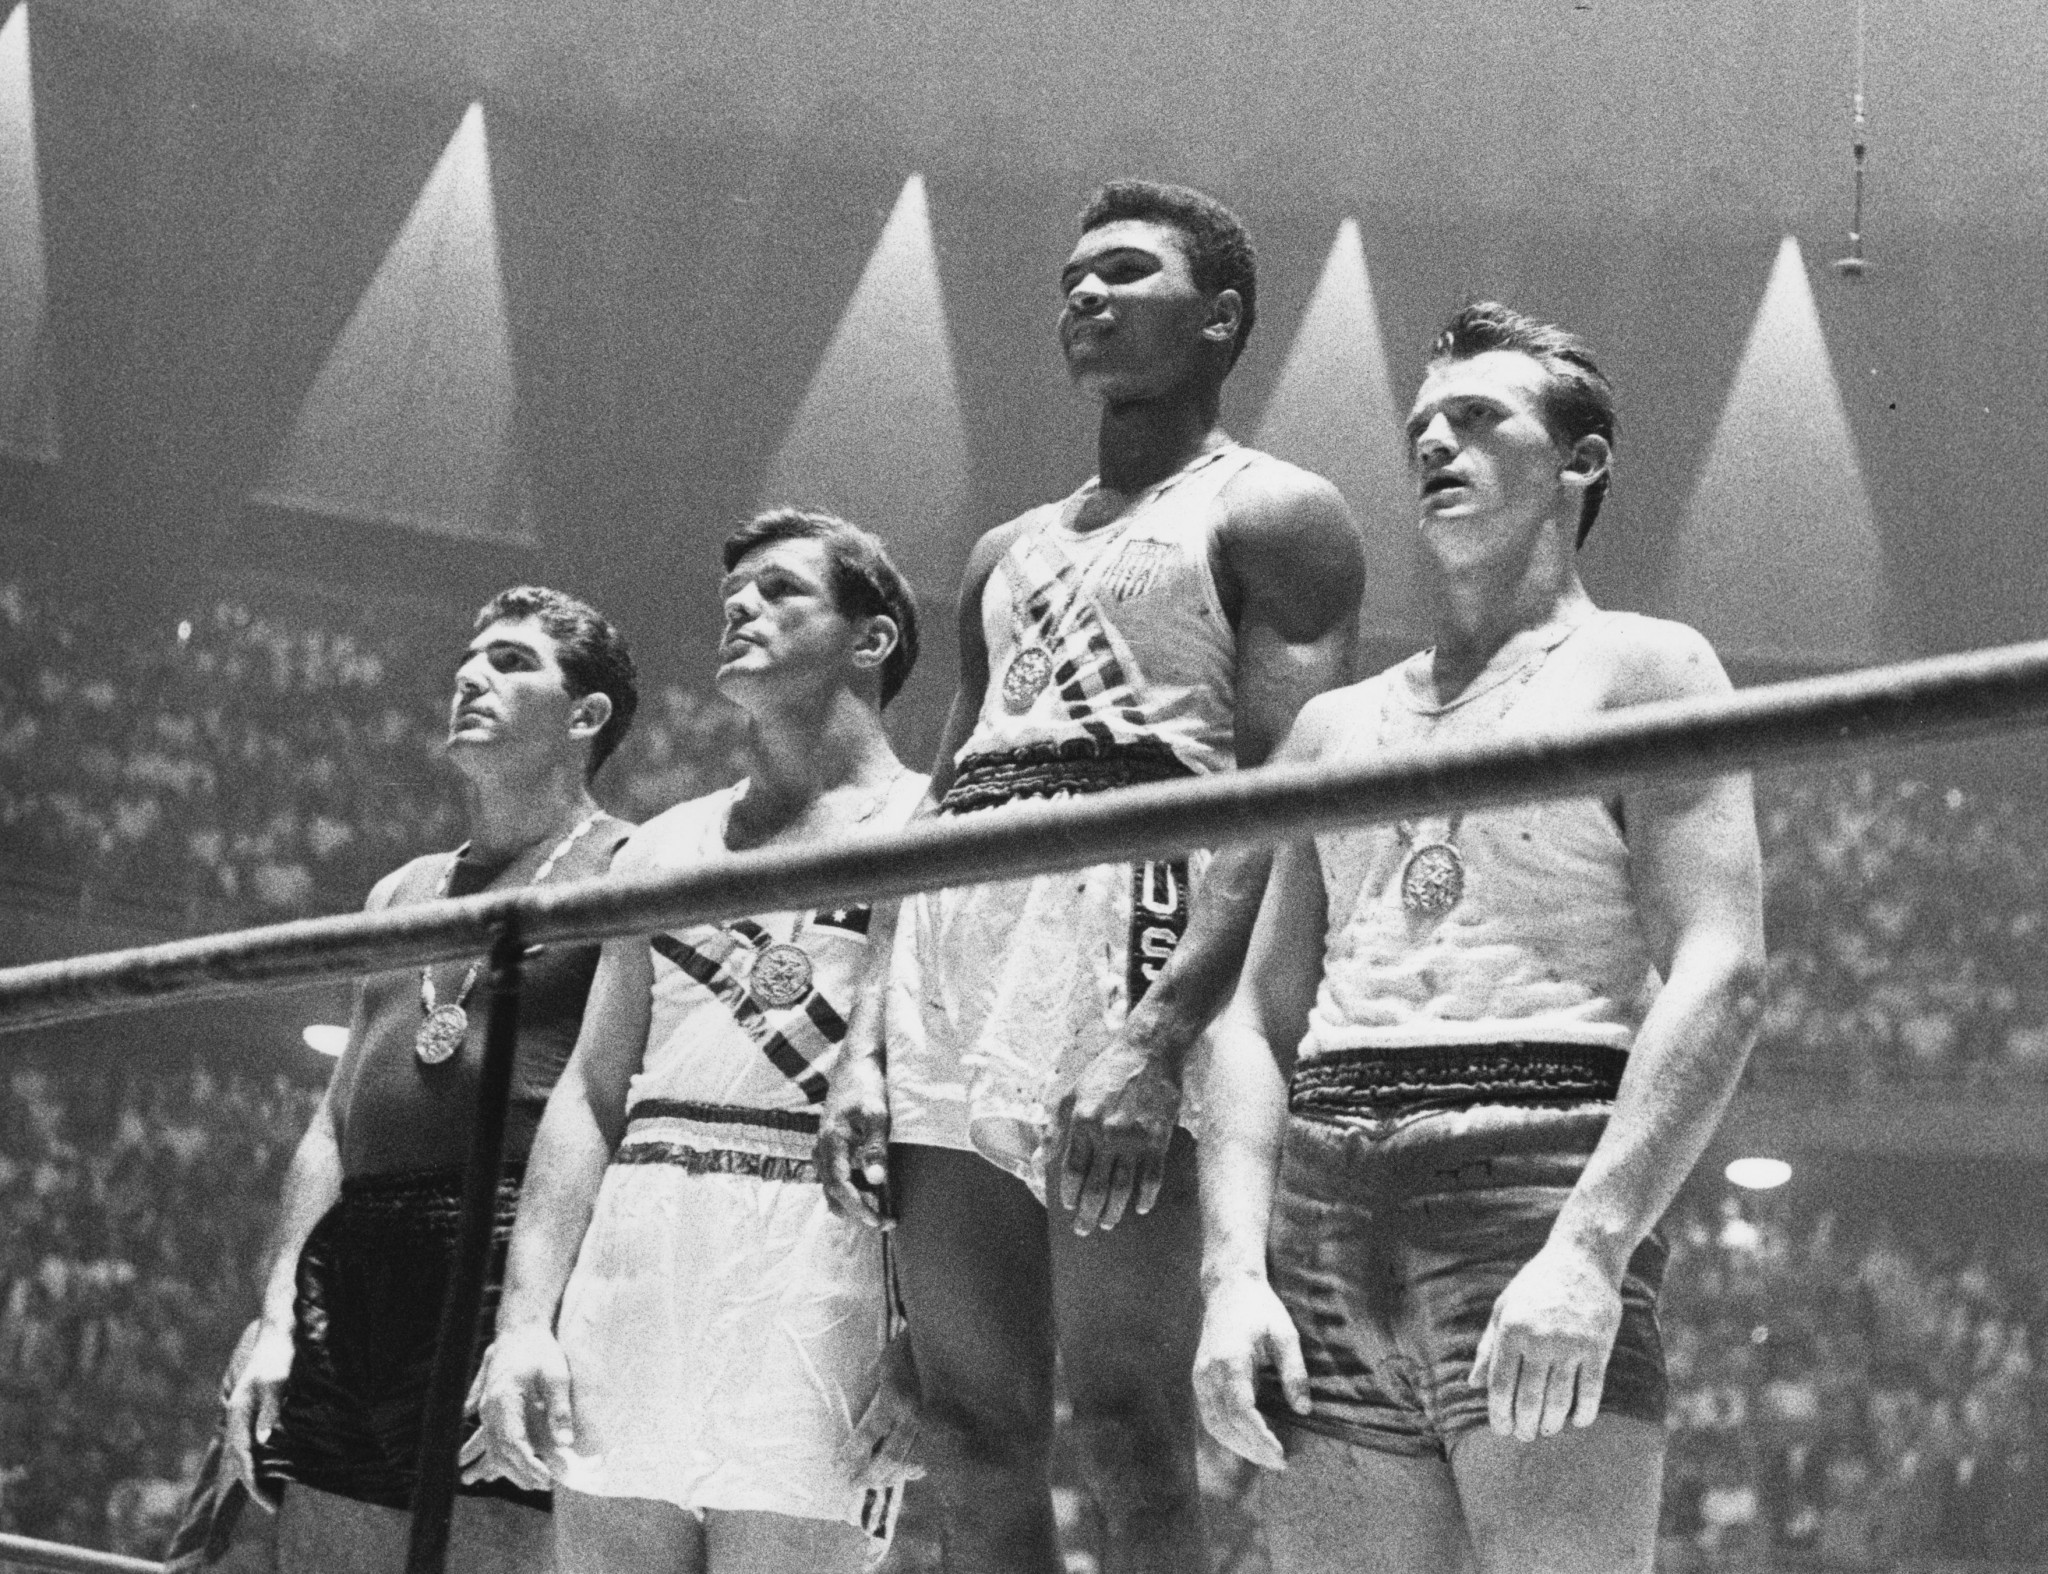 Tony Madigan, second left, on the podium at the 1960 Rome Olympics with Cassius Clay, centre, gold; Zbigniew Pietrzykowski of Poland, right, silver  and Giulio Saraudi, Italy, joint bronze ©Getty Images